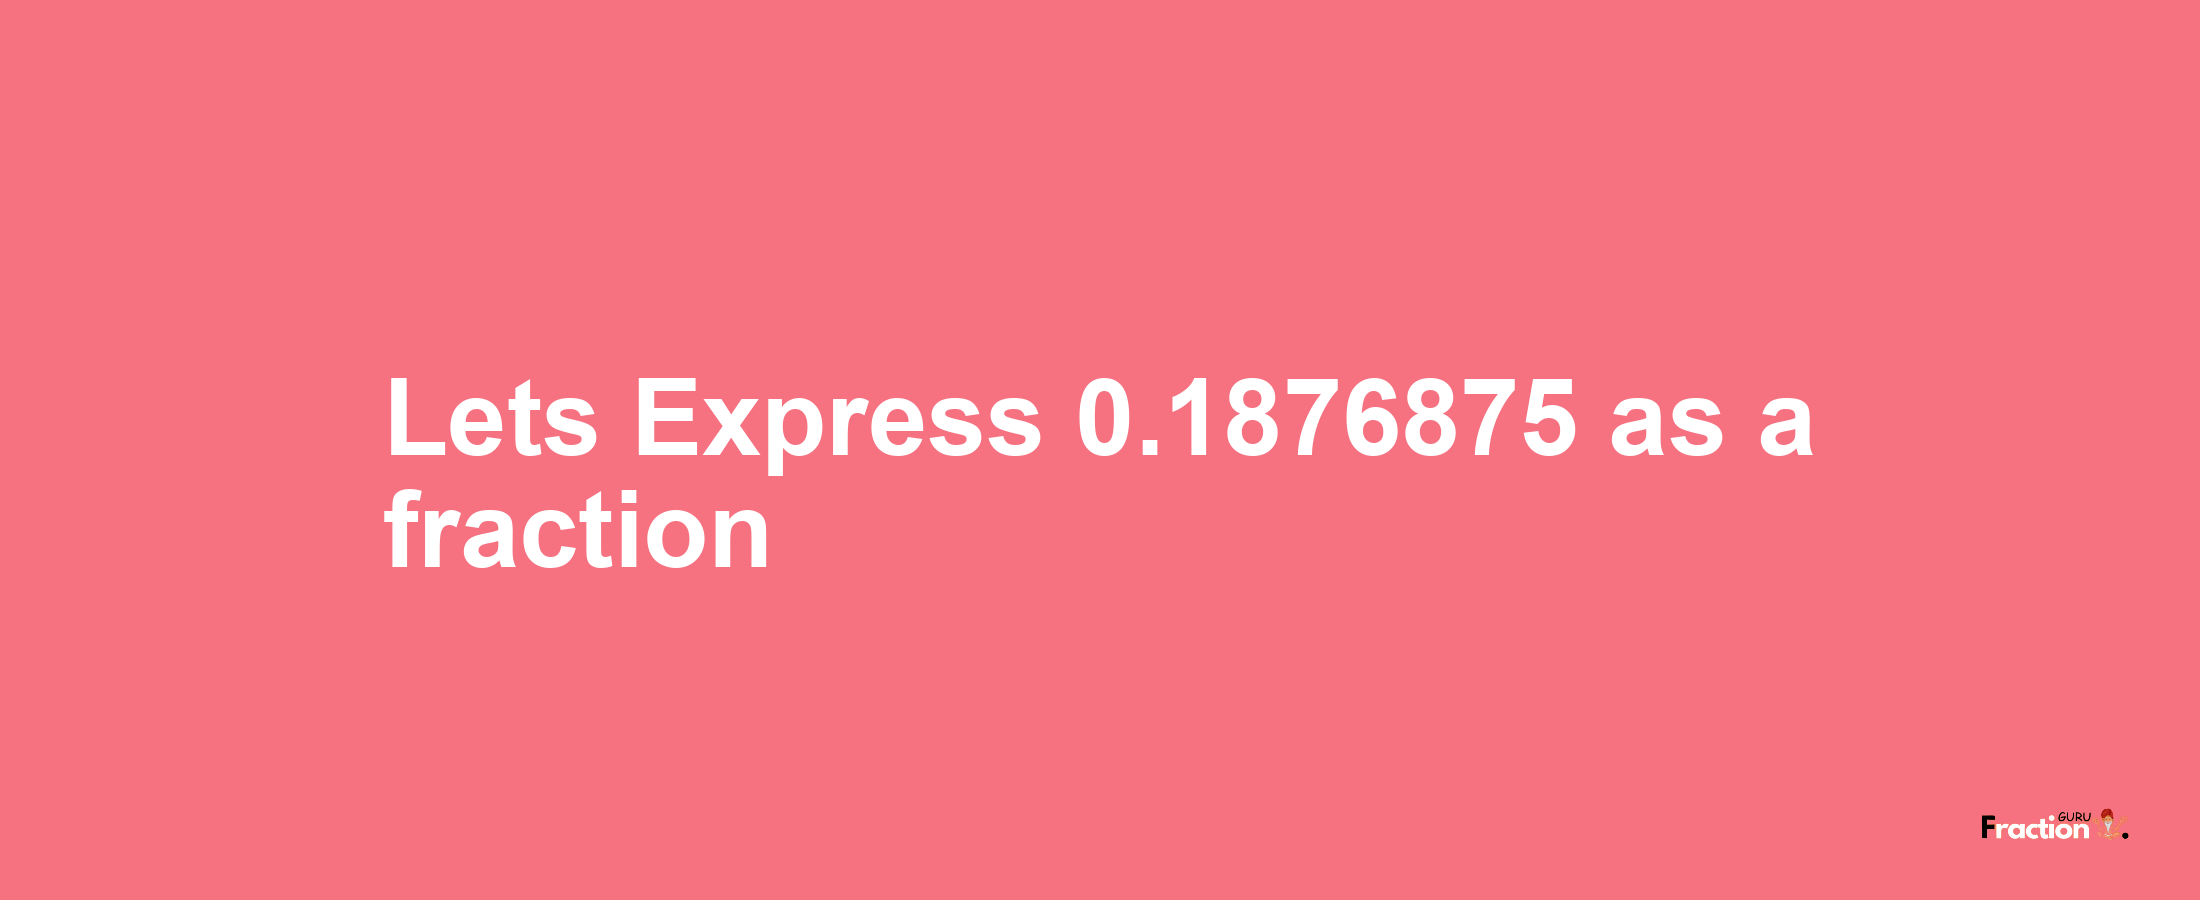 Lets Express 0.1876875 as afraction